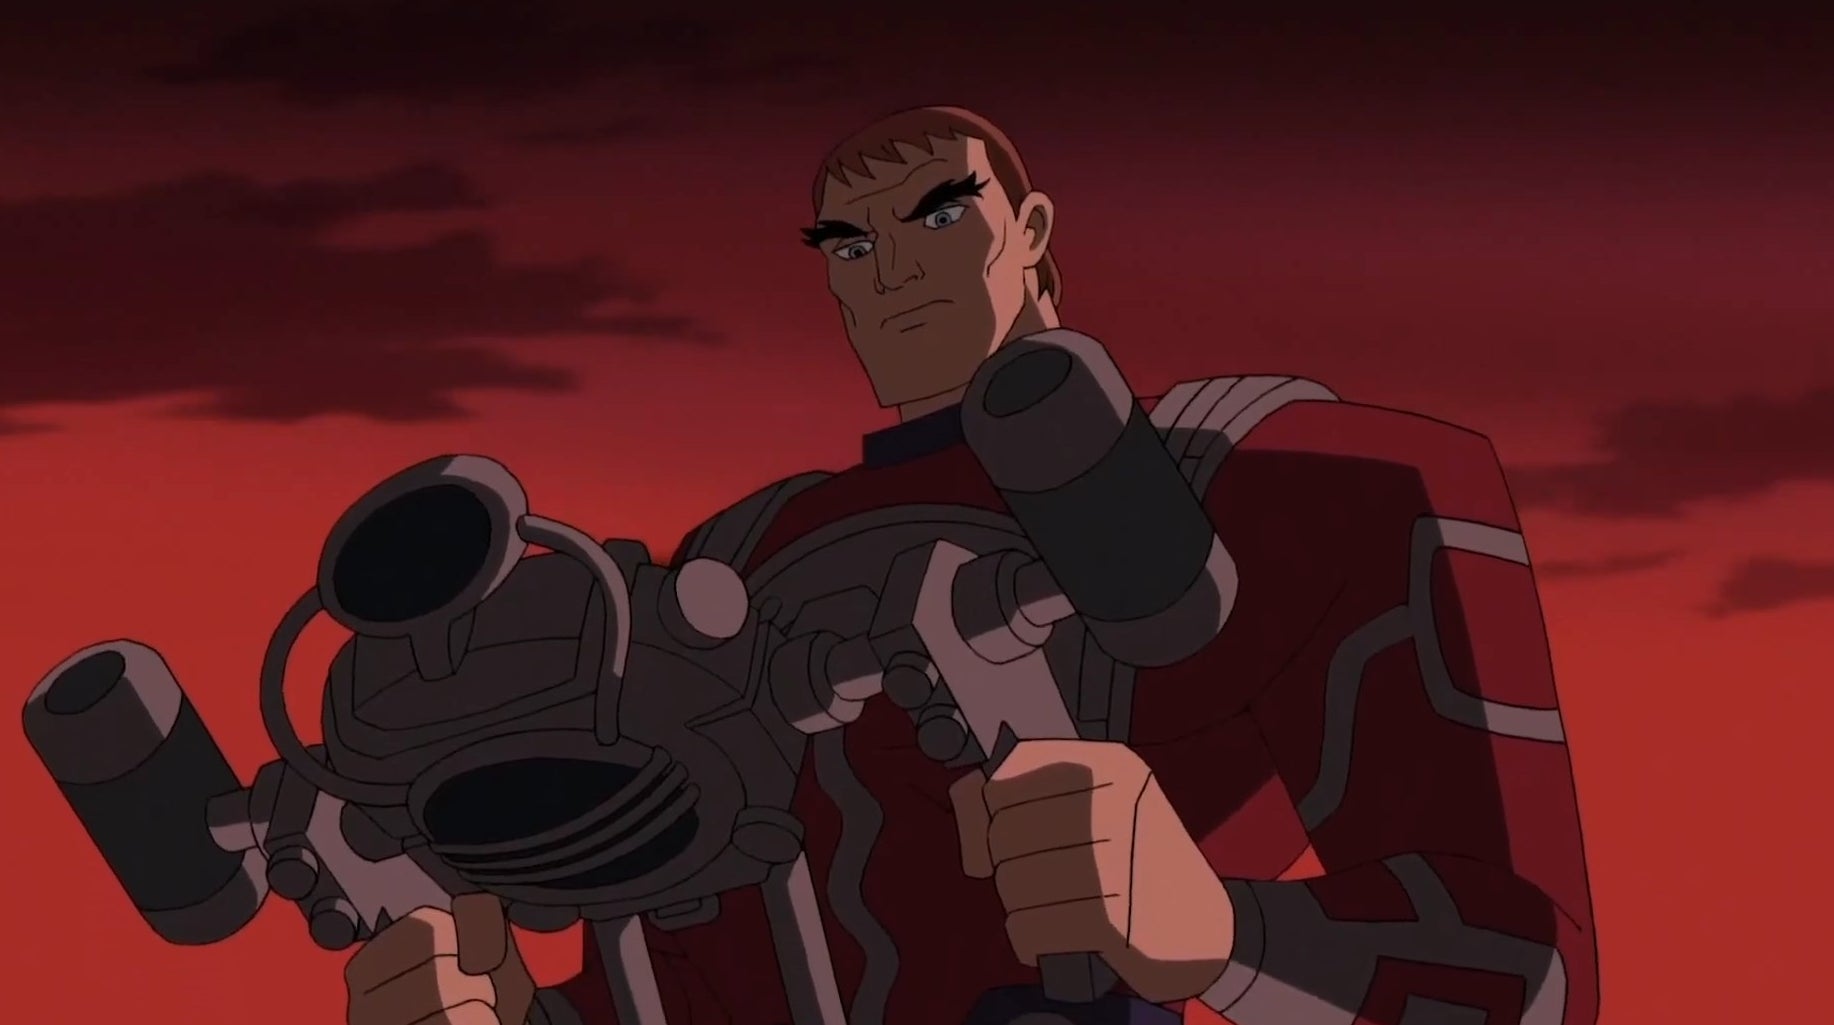 Orion on his Astro-Harness in "Justice League: Gods and Monsters"